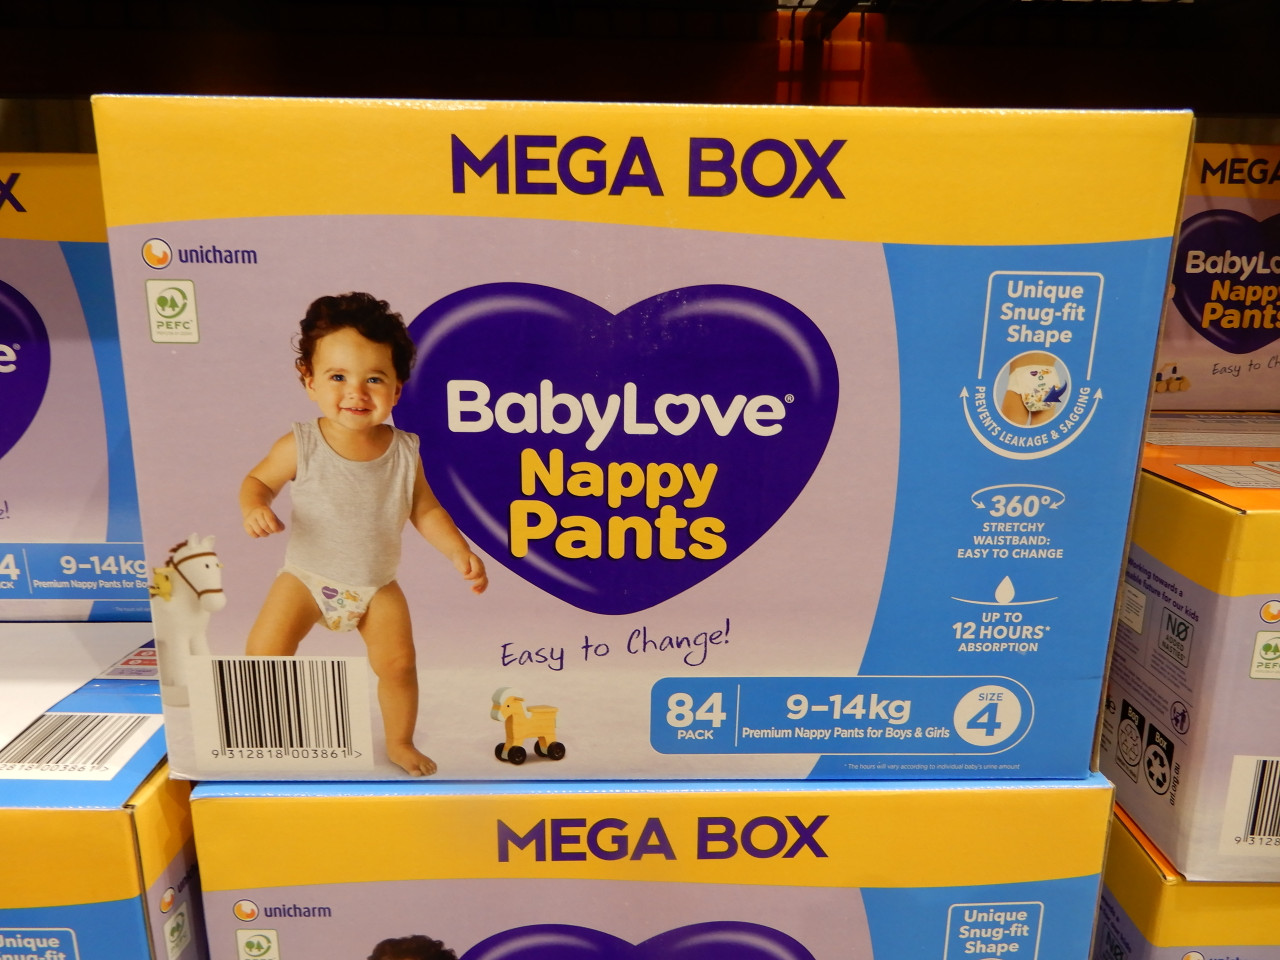 Baby Love Nappy Pants Size 4 Toddler 9 - 14KG (2 x 56) 112's